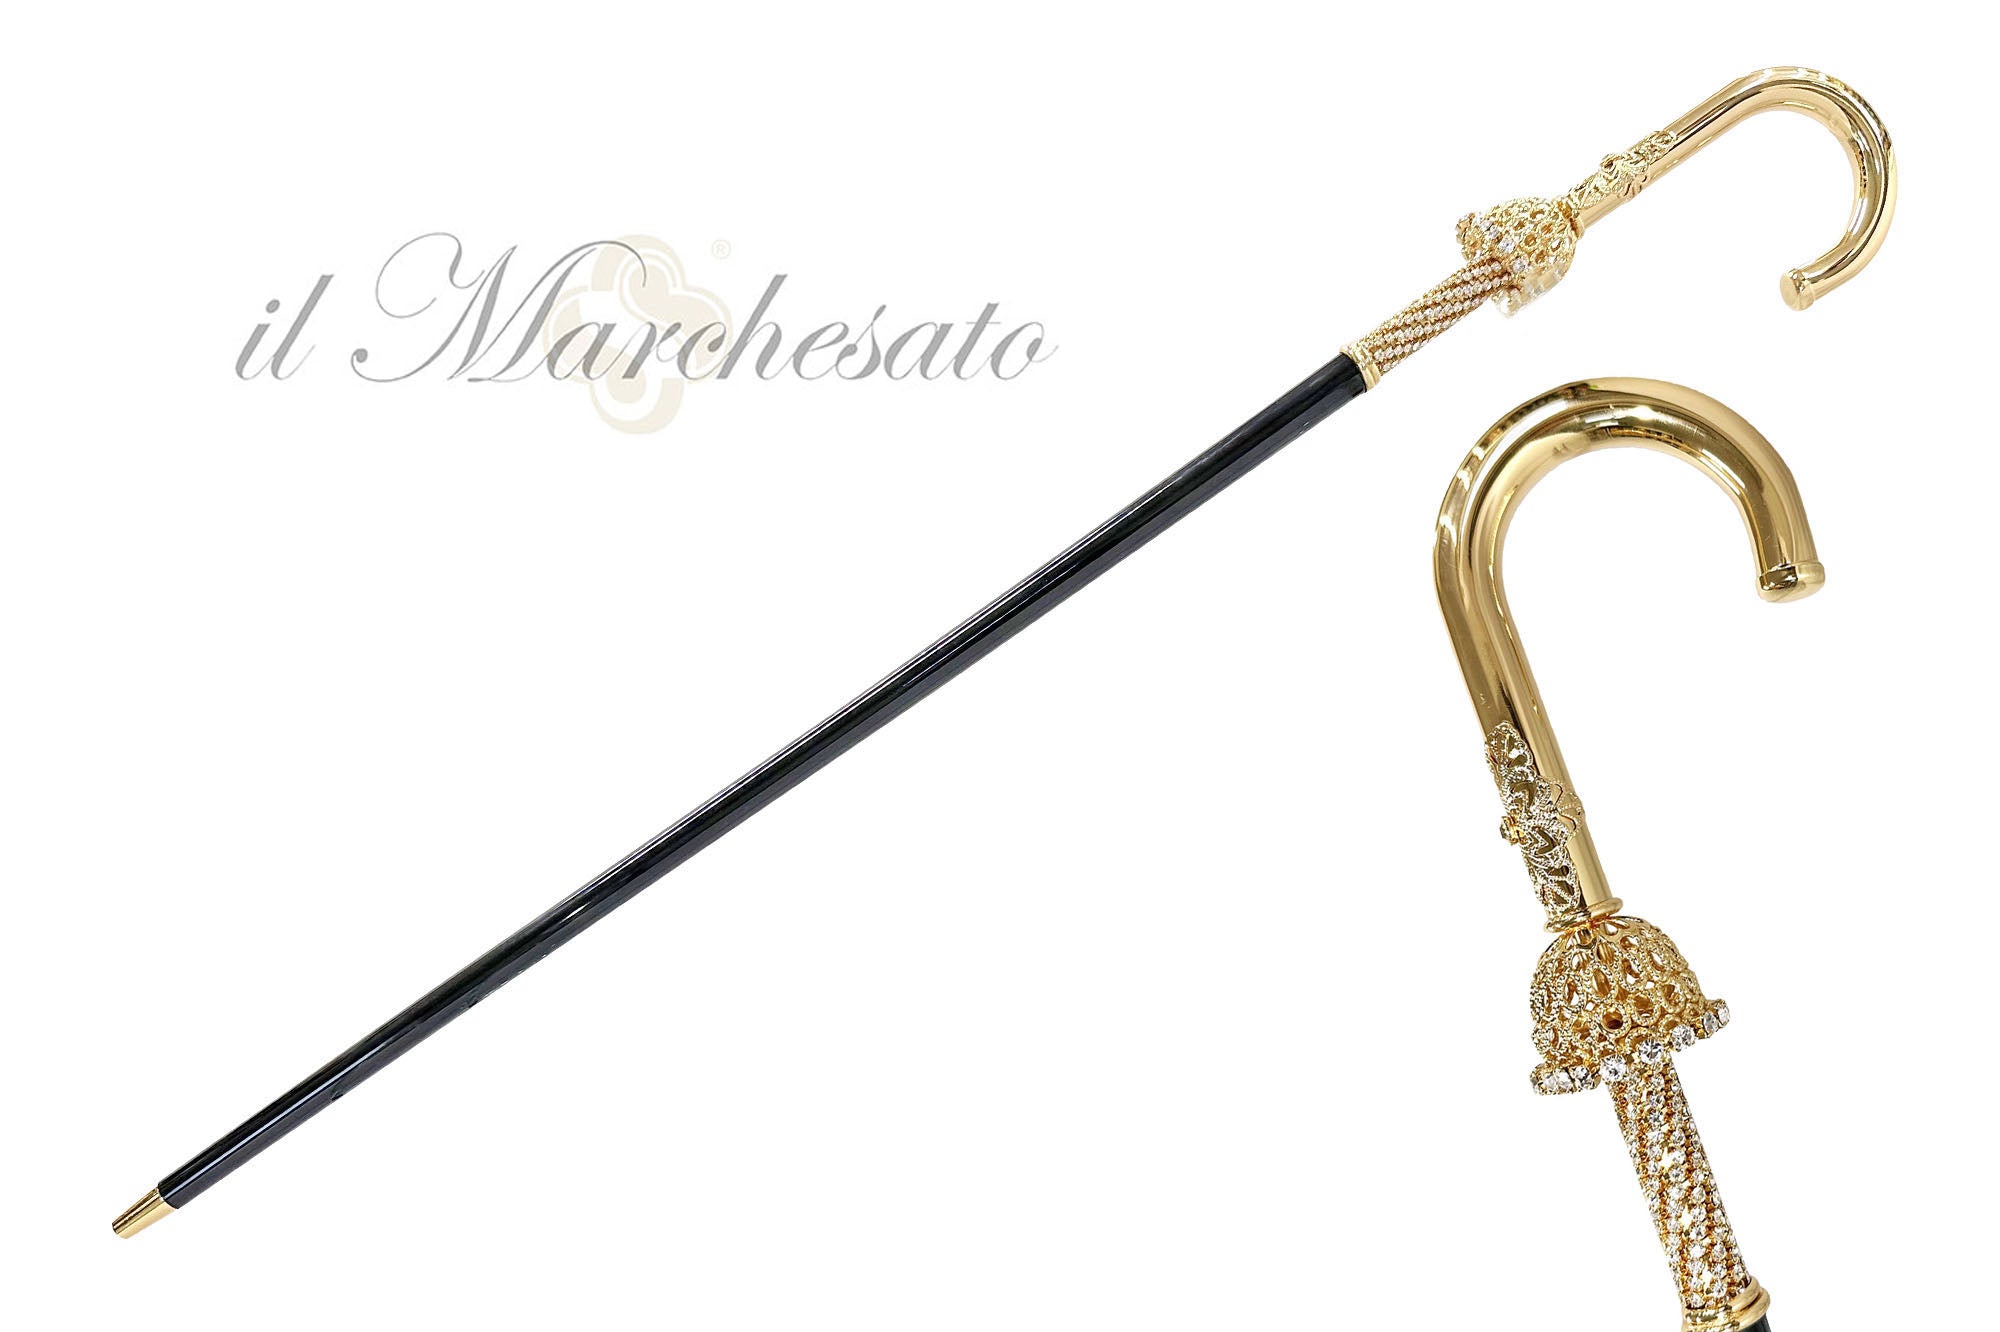 Majestic cane 24K goldplated with crystals - limited collection